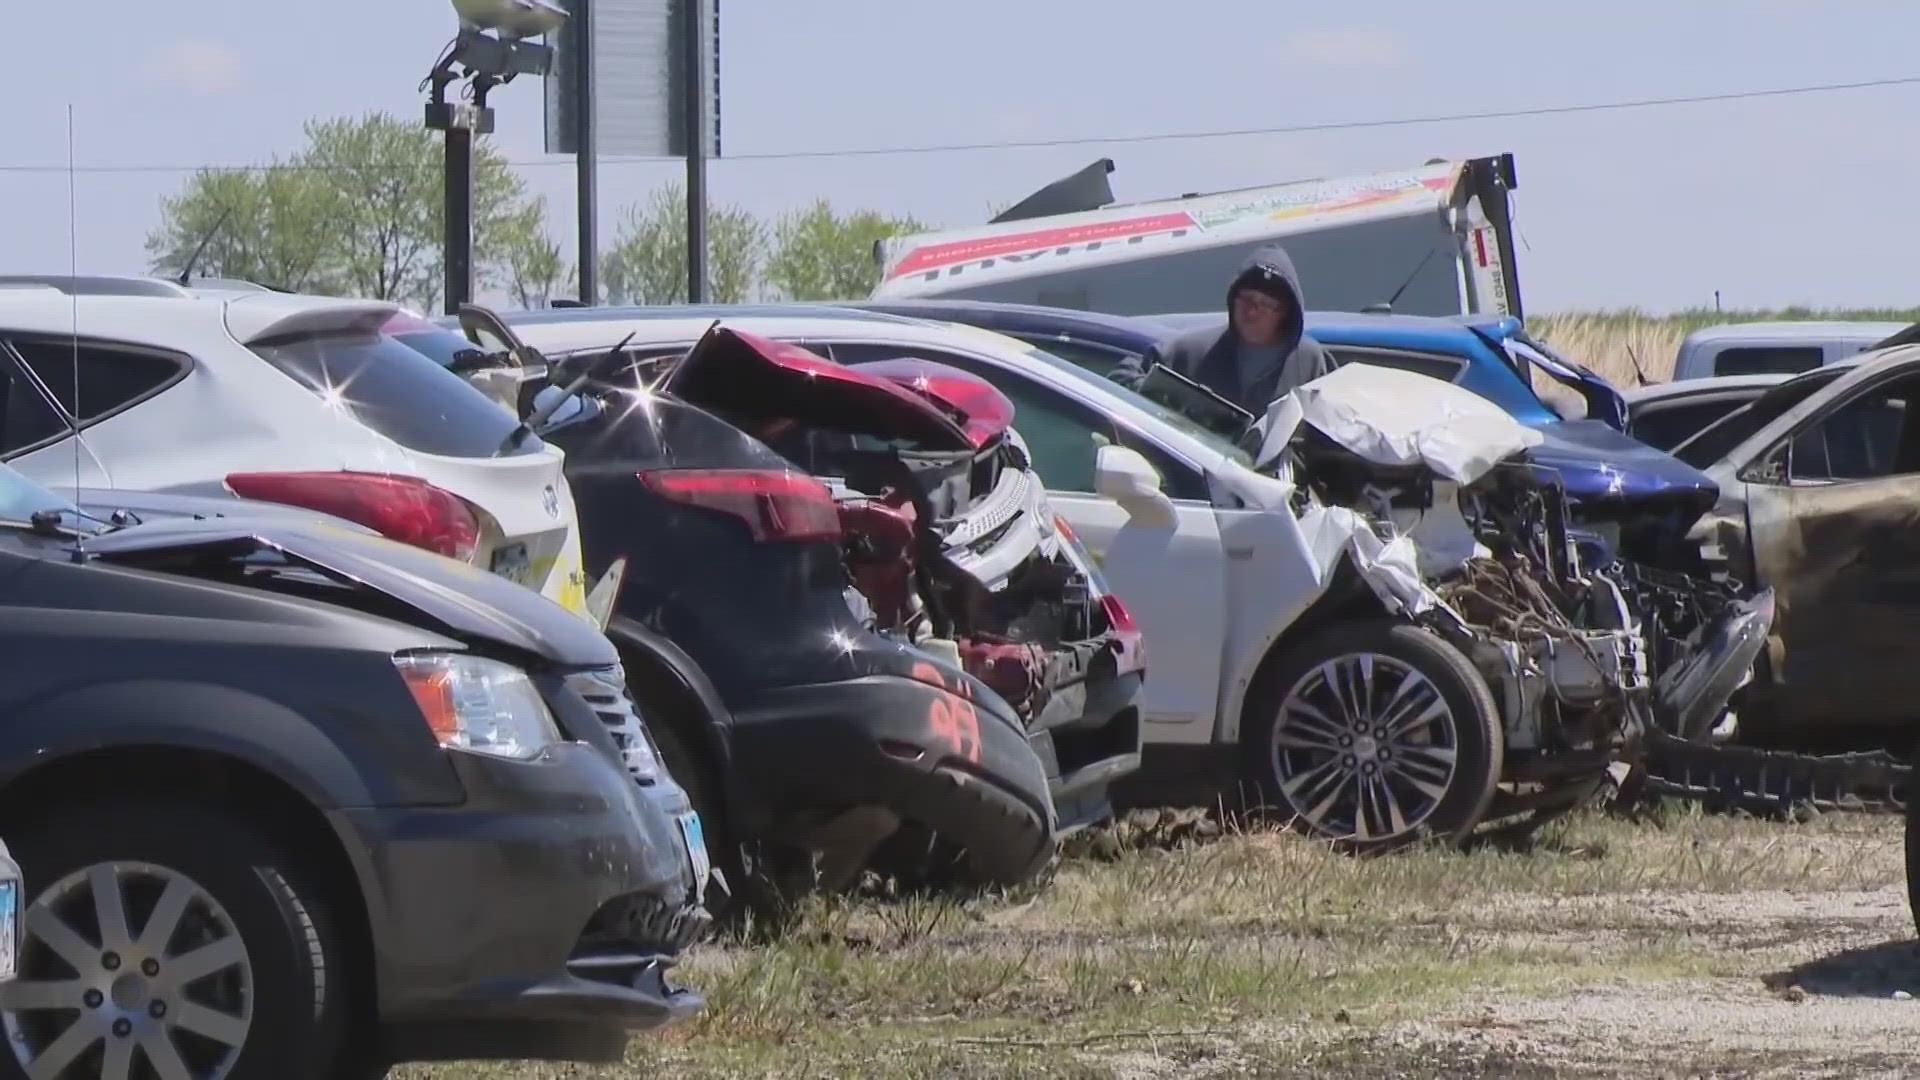 Illinois State Troopers are still working to release totaled and drivable vehicles to owners.